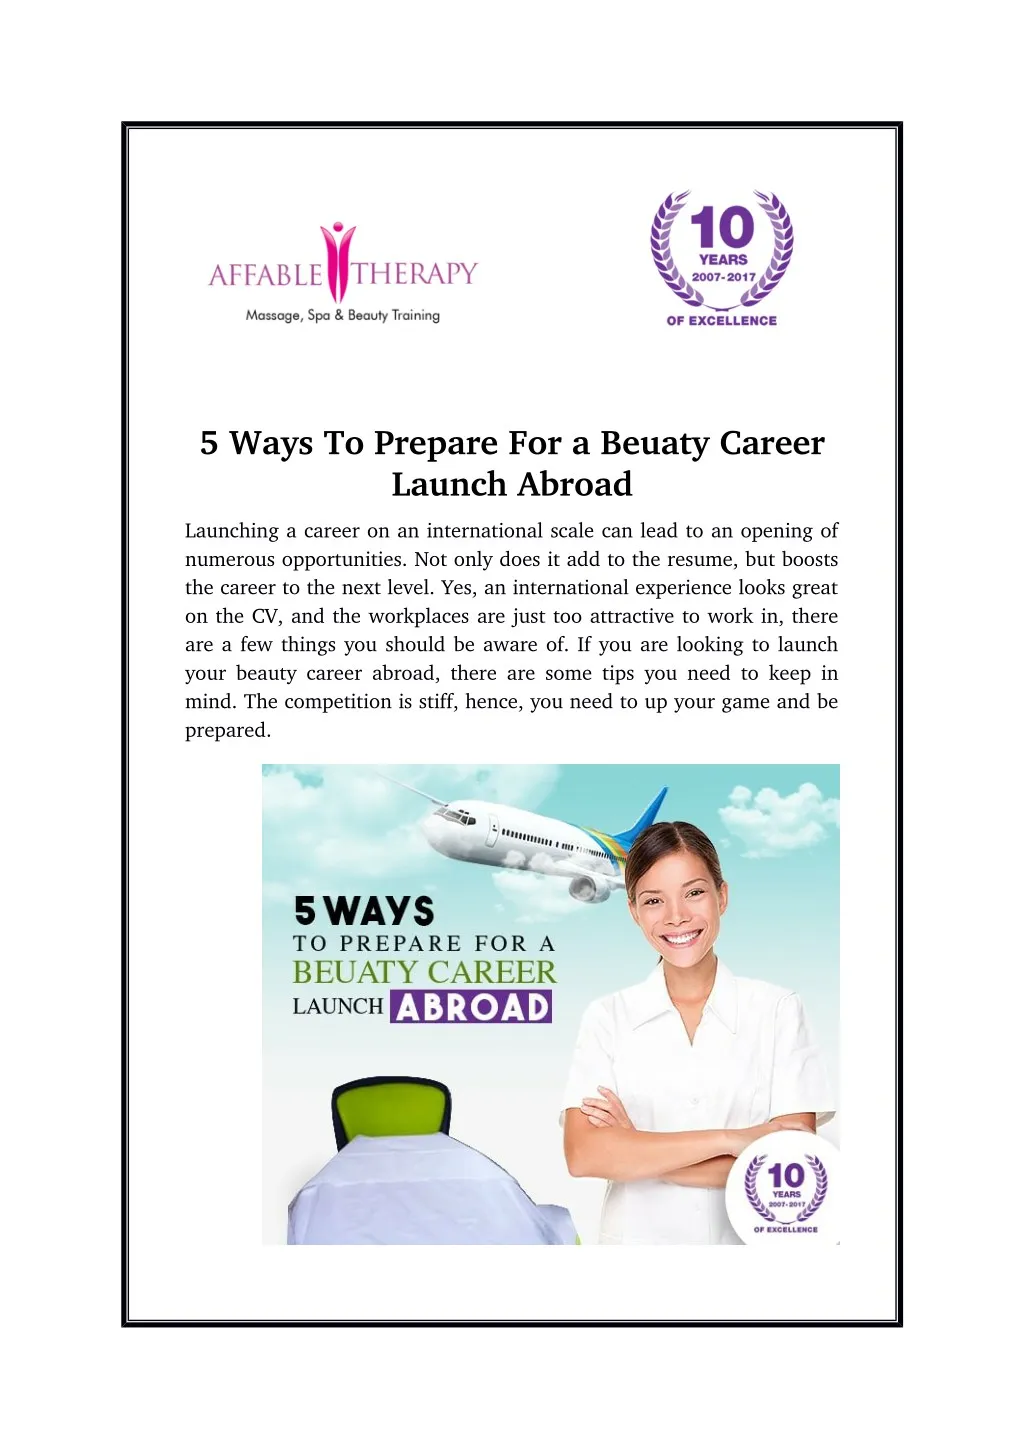 5 ways to prepare for a beuaty career launch